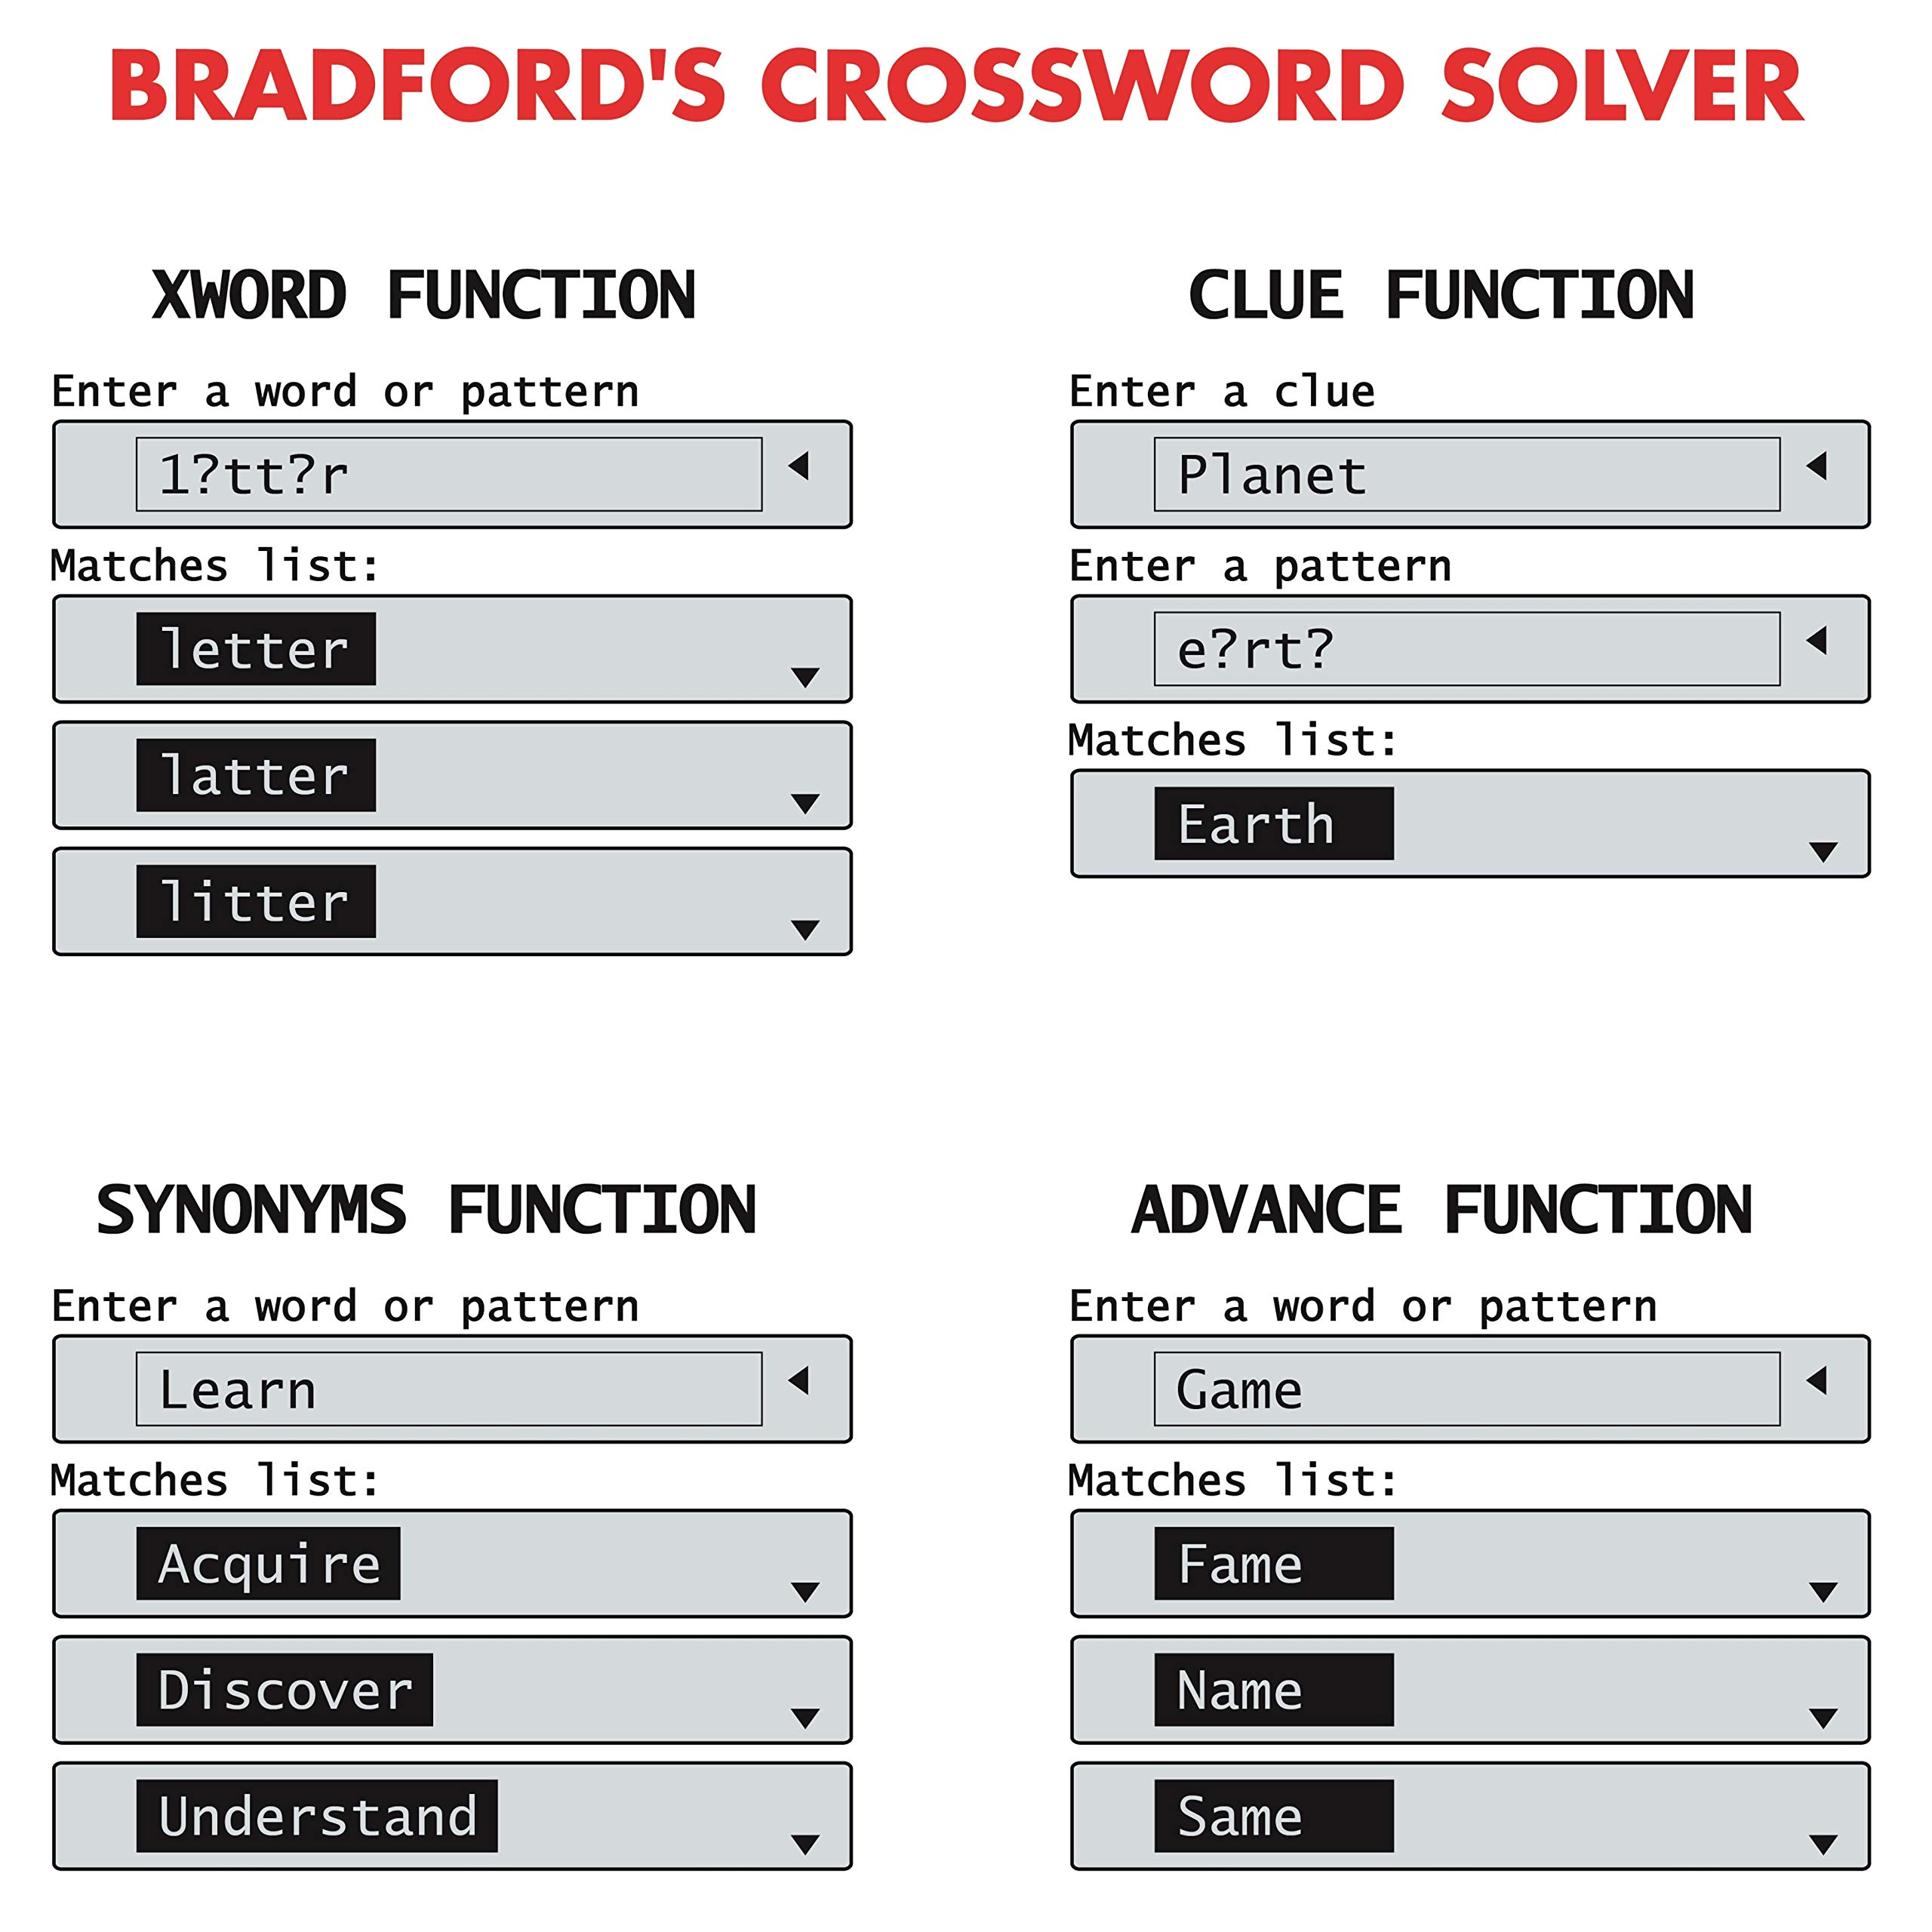 Lexibook - Collins Bradford, Electronic Crossword Solver, Bradford, Phonetic Spell-Correction, Words Games, Electronic, with Battery, Black/White, CR753EN